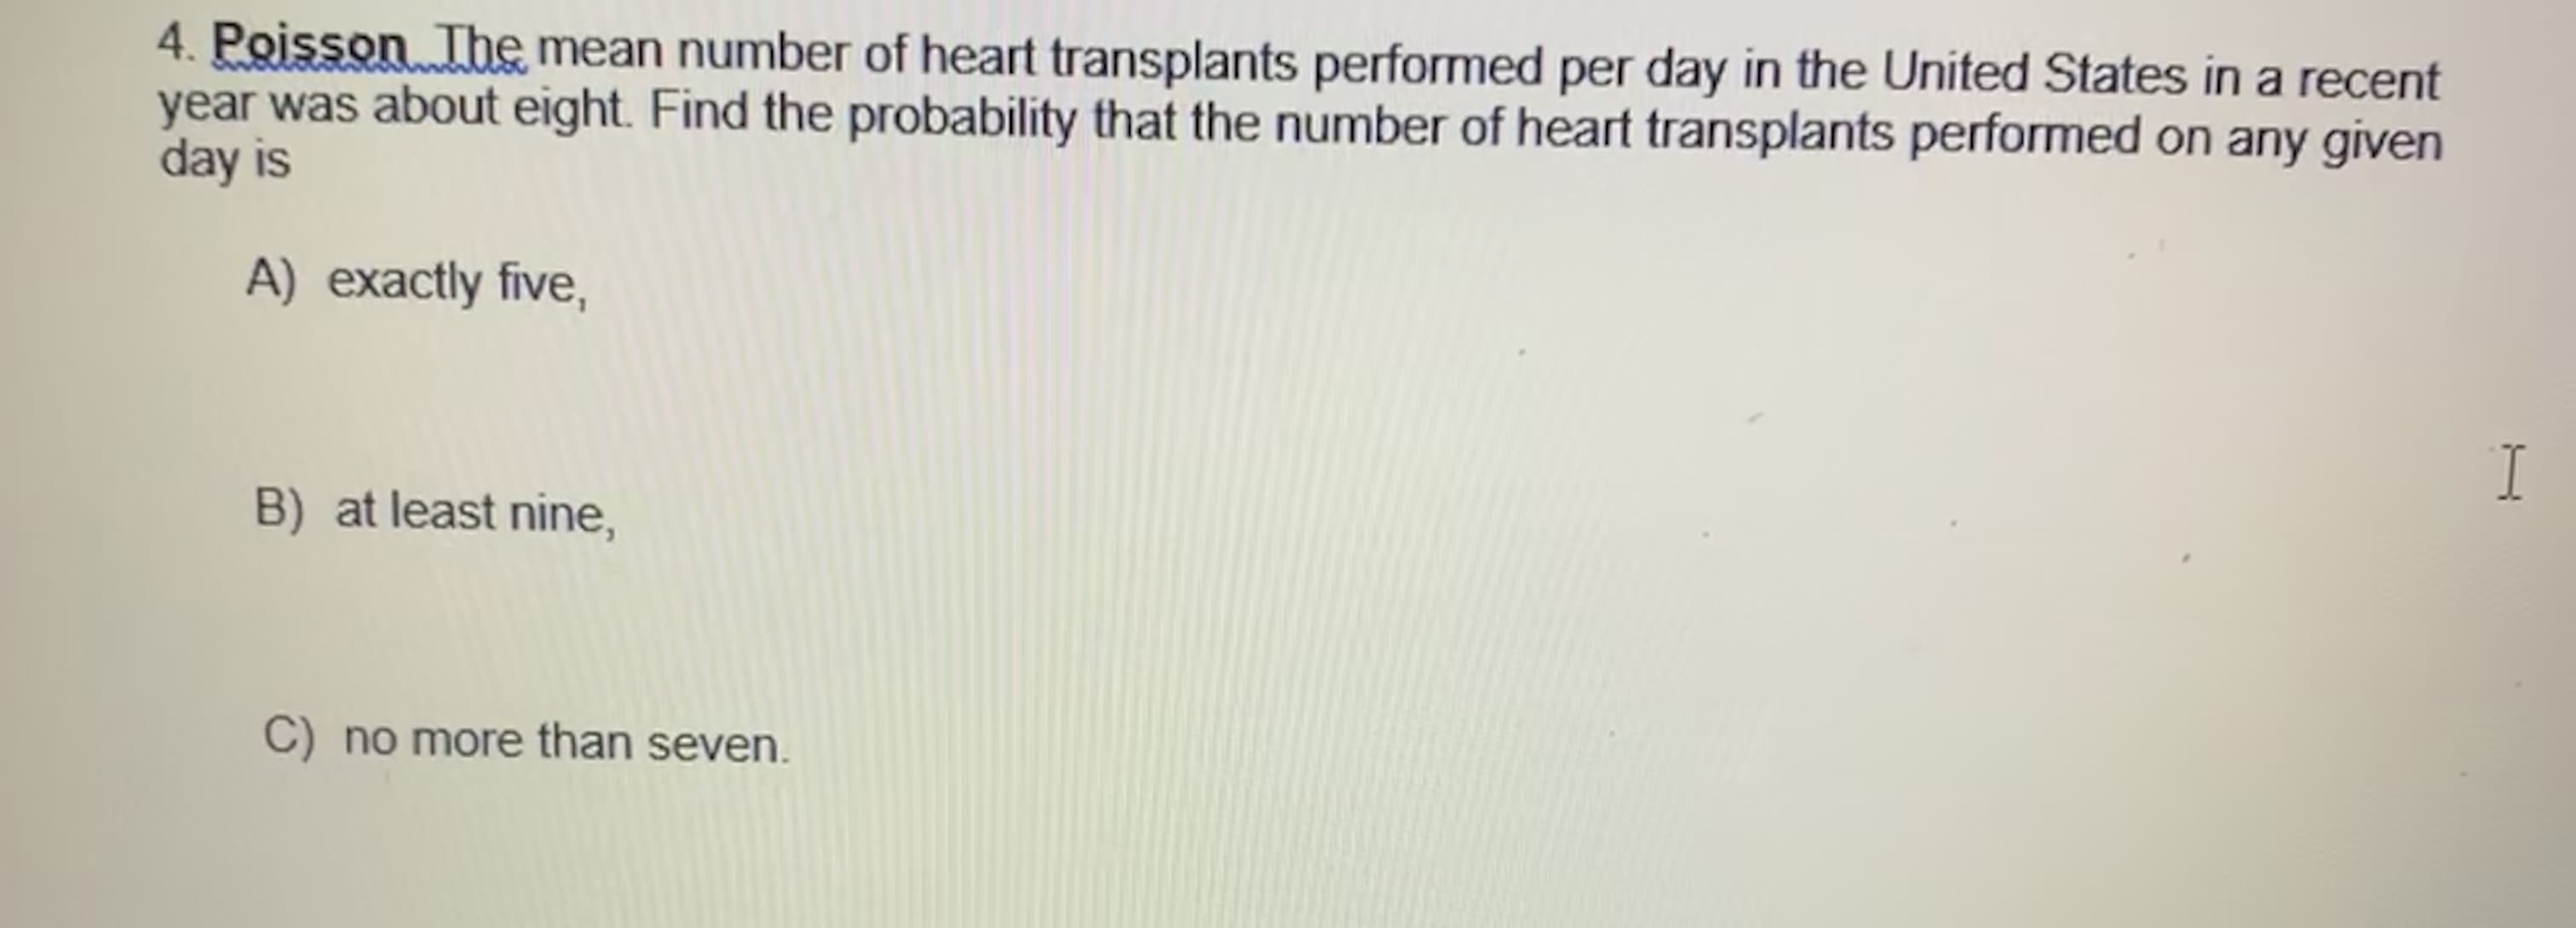 4. Poisson The mean number of heart transplants performed per day in the United States in a recent
year was about eight. Find the probability that the number of heart transplants performed on any given
day is
A) exactly five,
I.
B) at least nine,
C) no more than seven.
